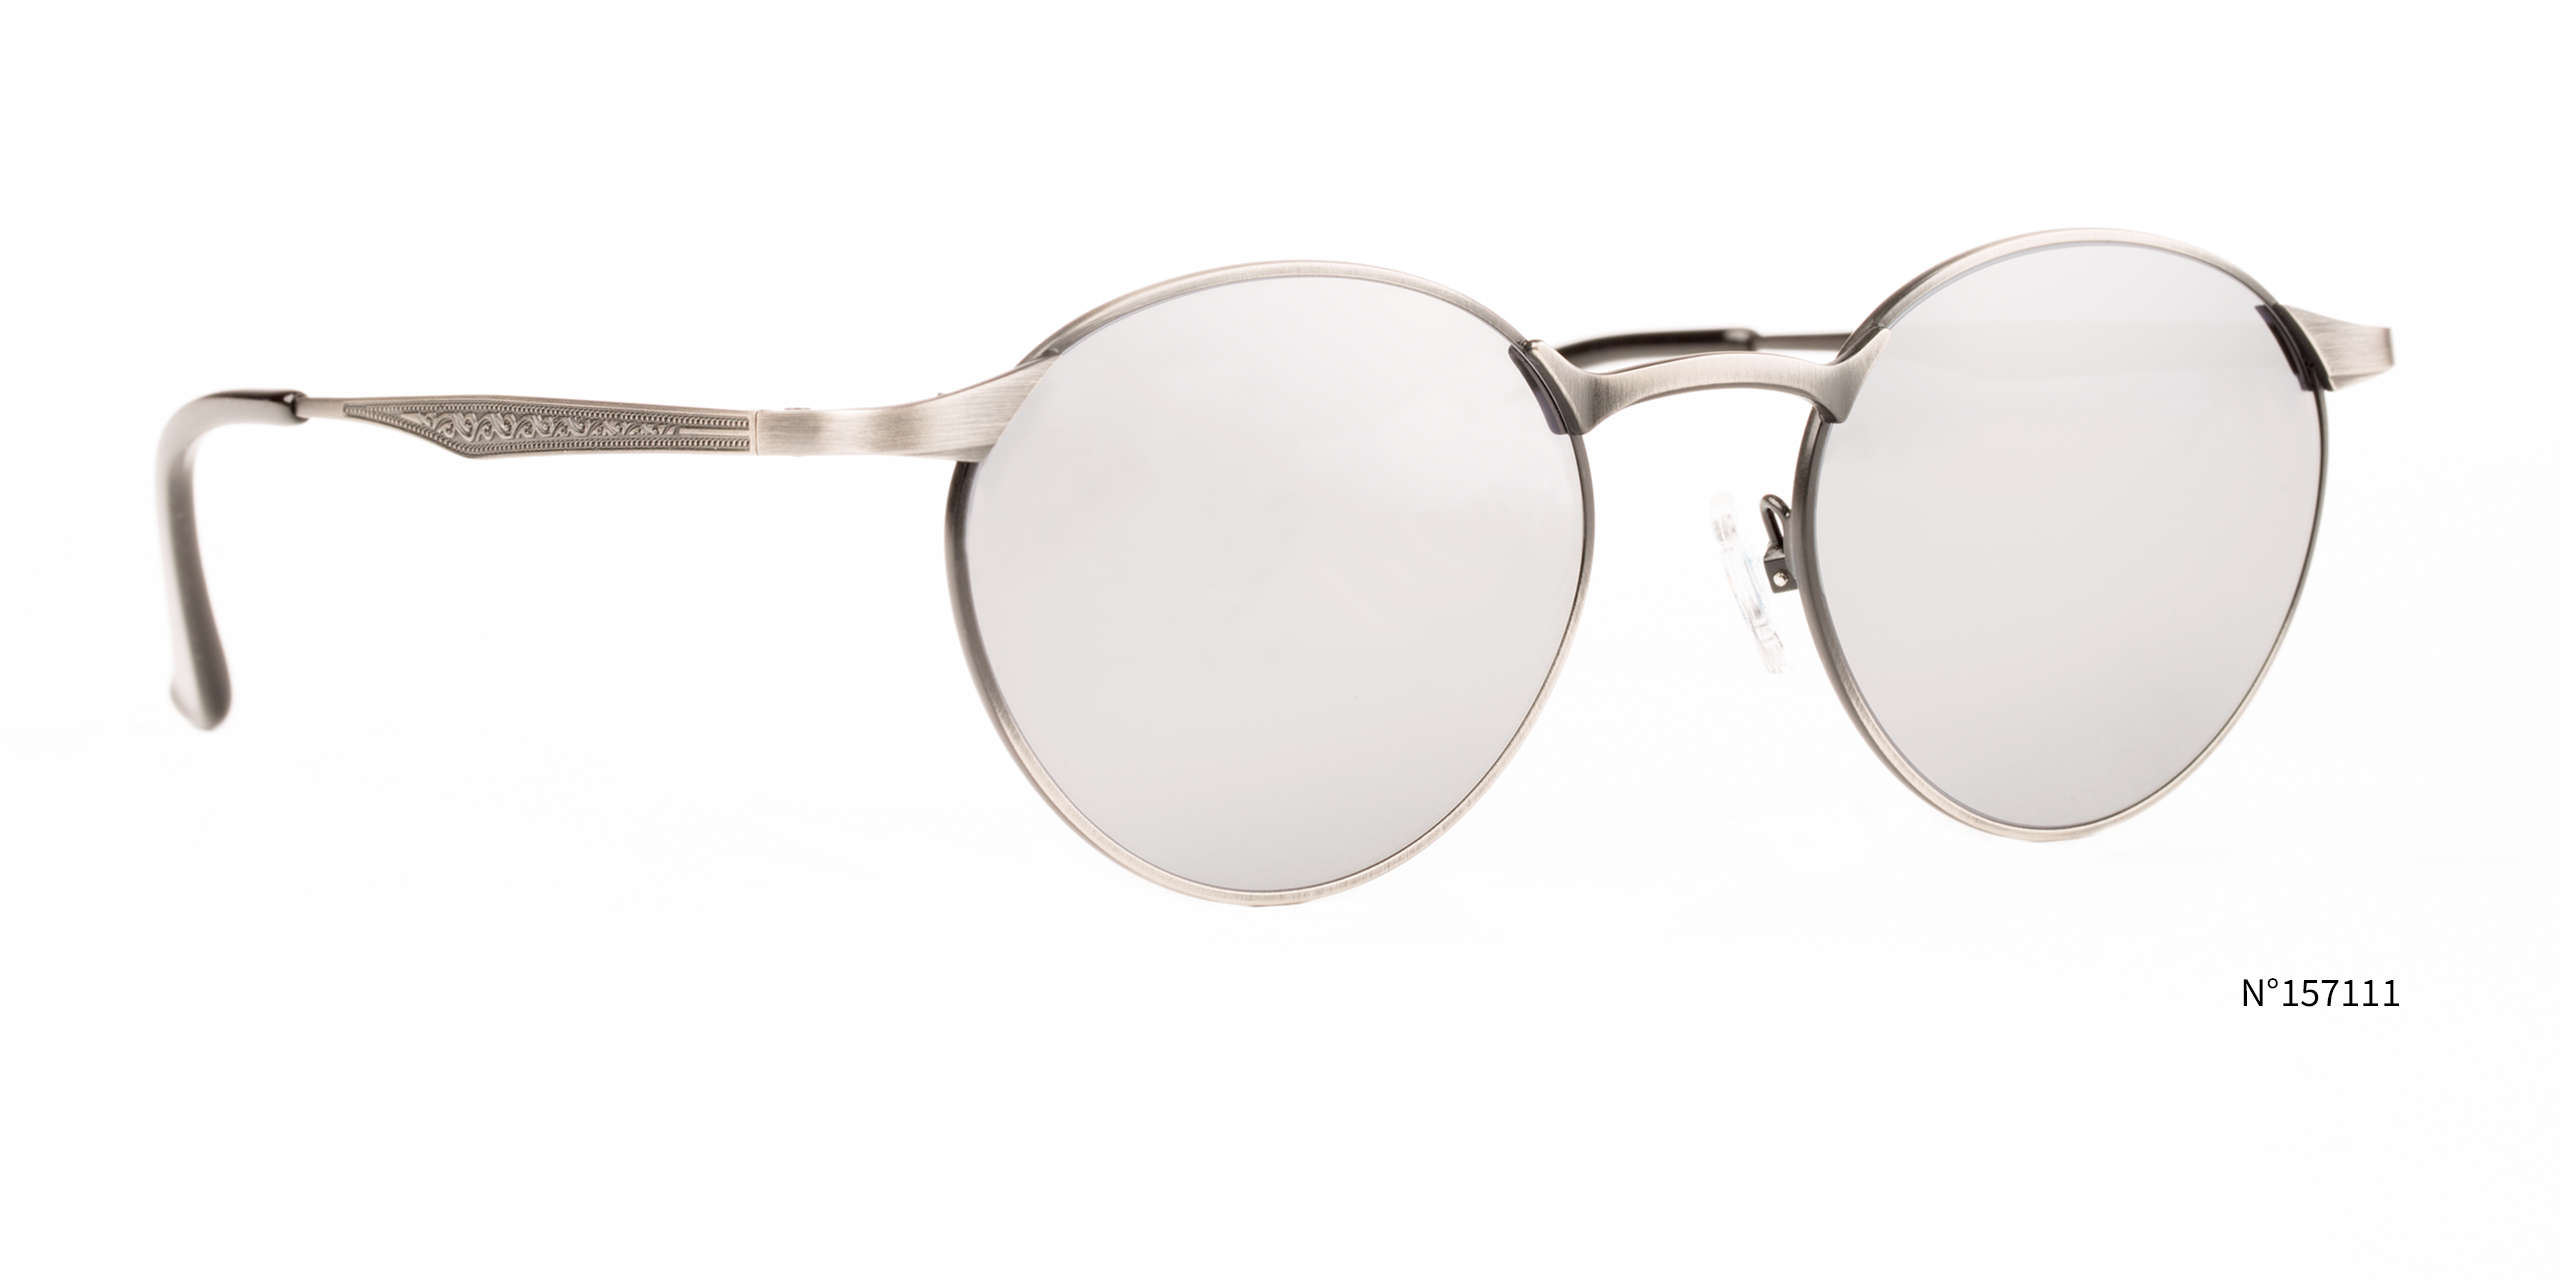 silver round stagecoach sunglasses